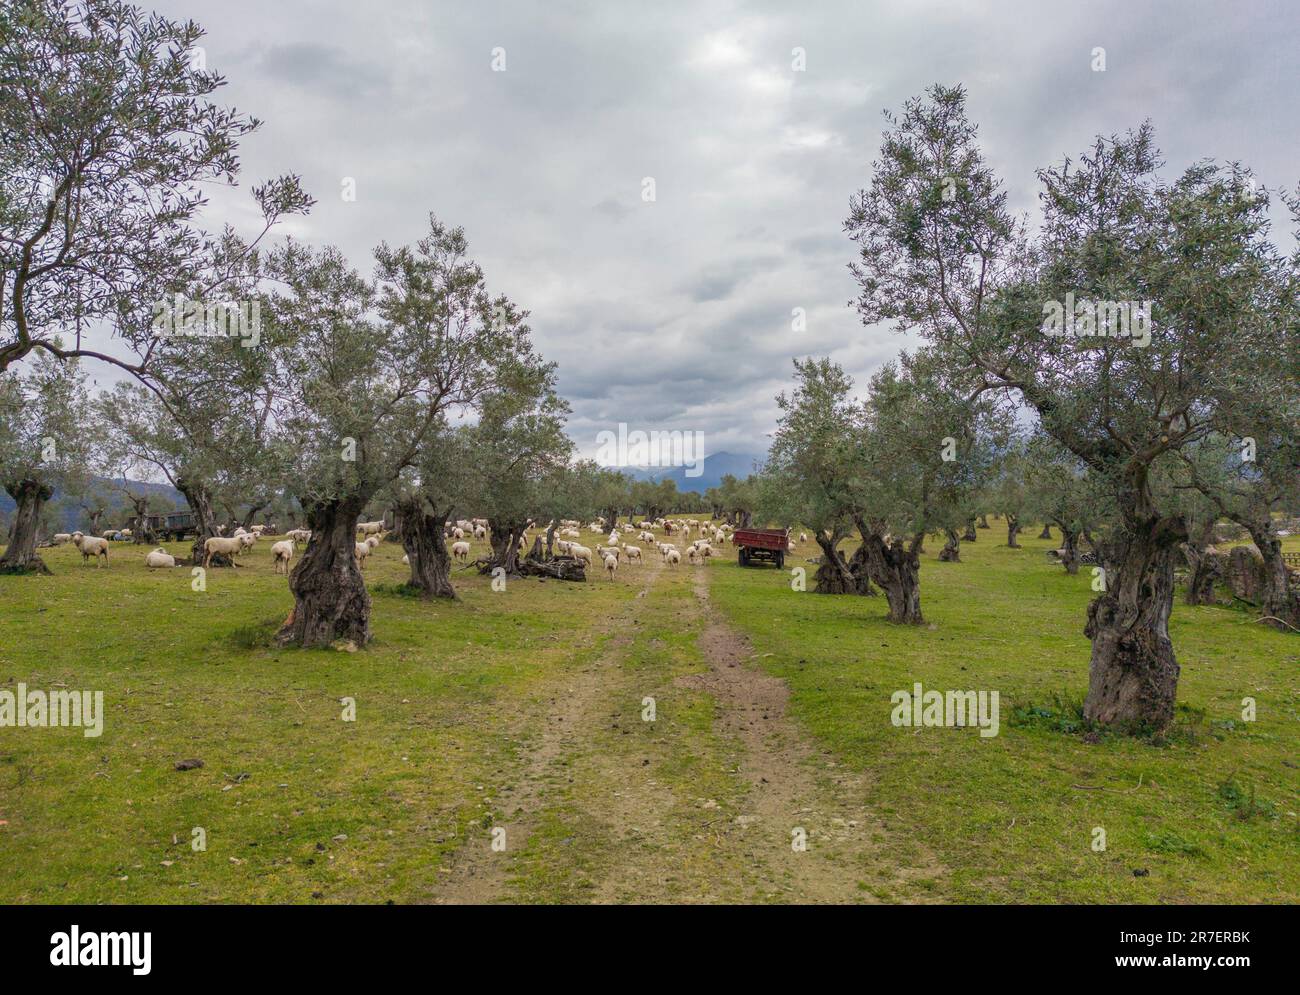 Sheeps grazing between olive trees. Sotofermoso Palace sorroundings. Abadia, Caceres, Spain. Stock Photo